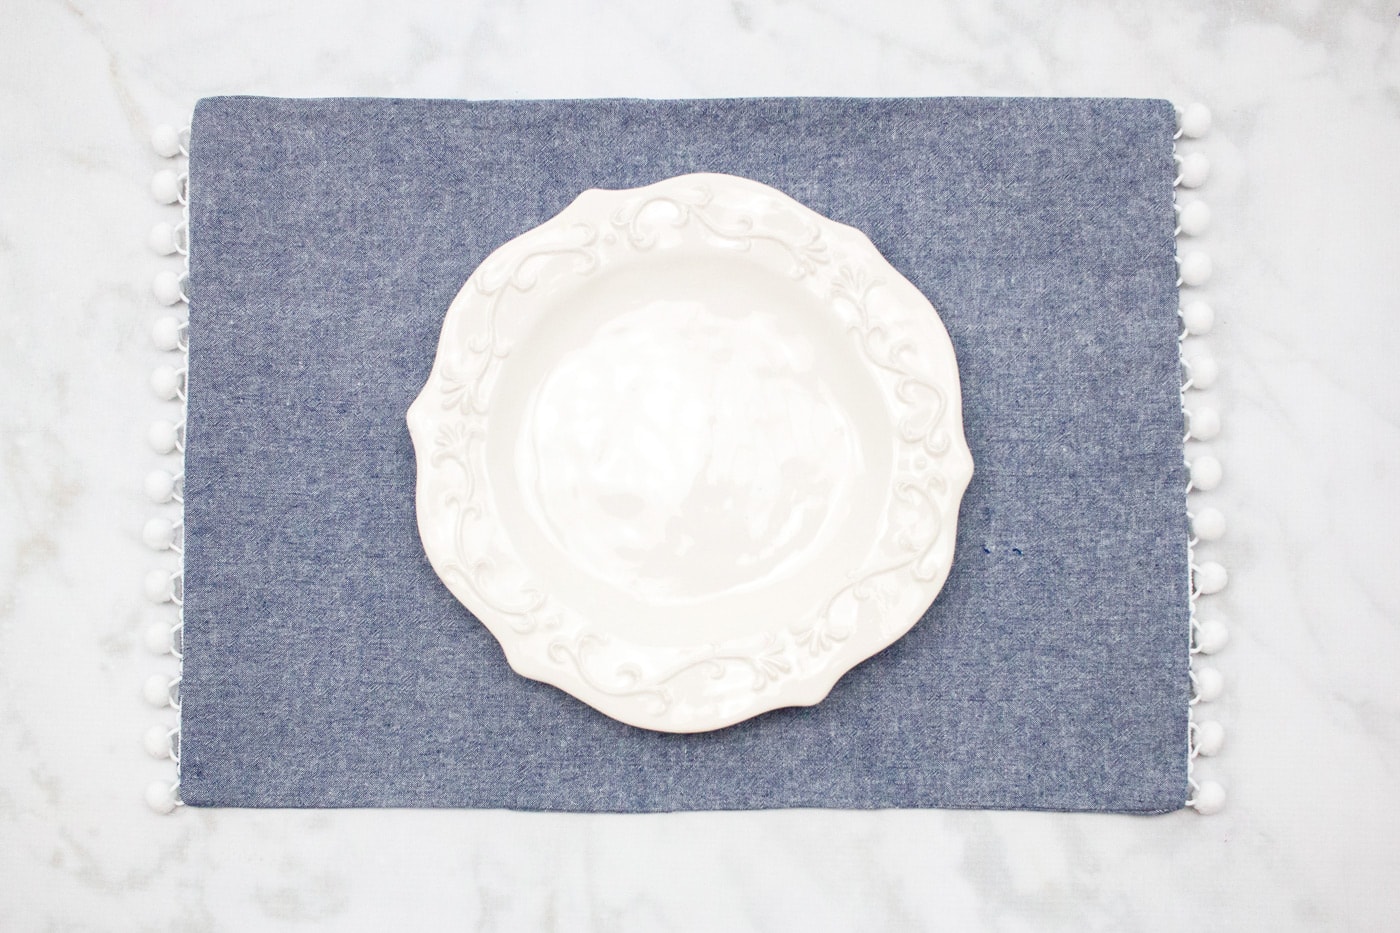 chambray placemat on marble table